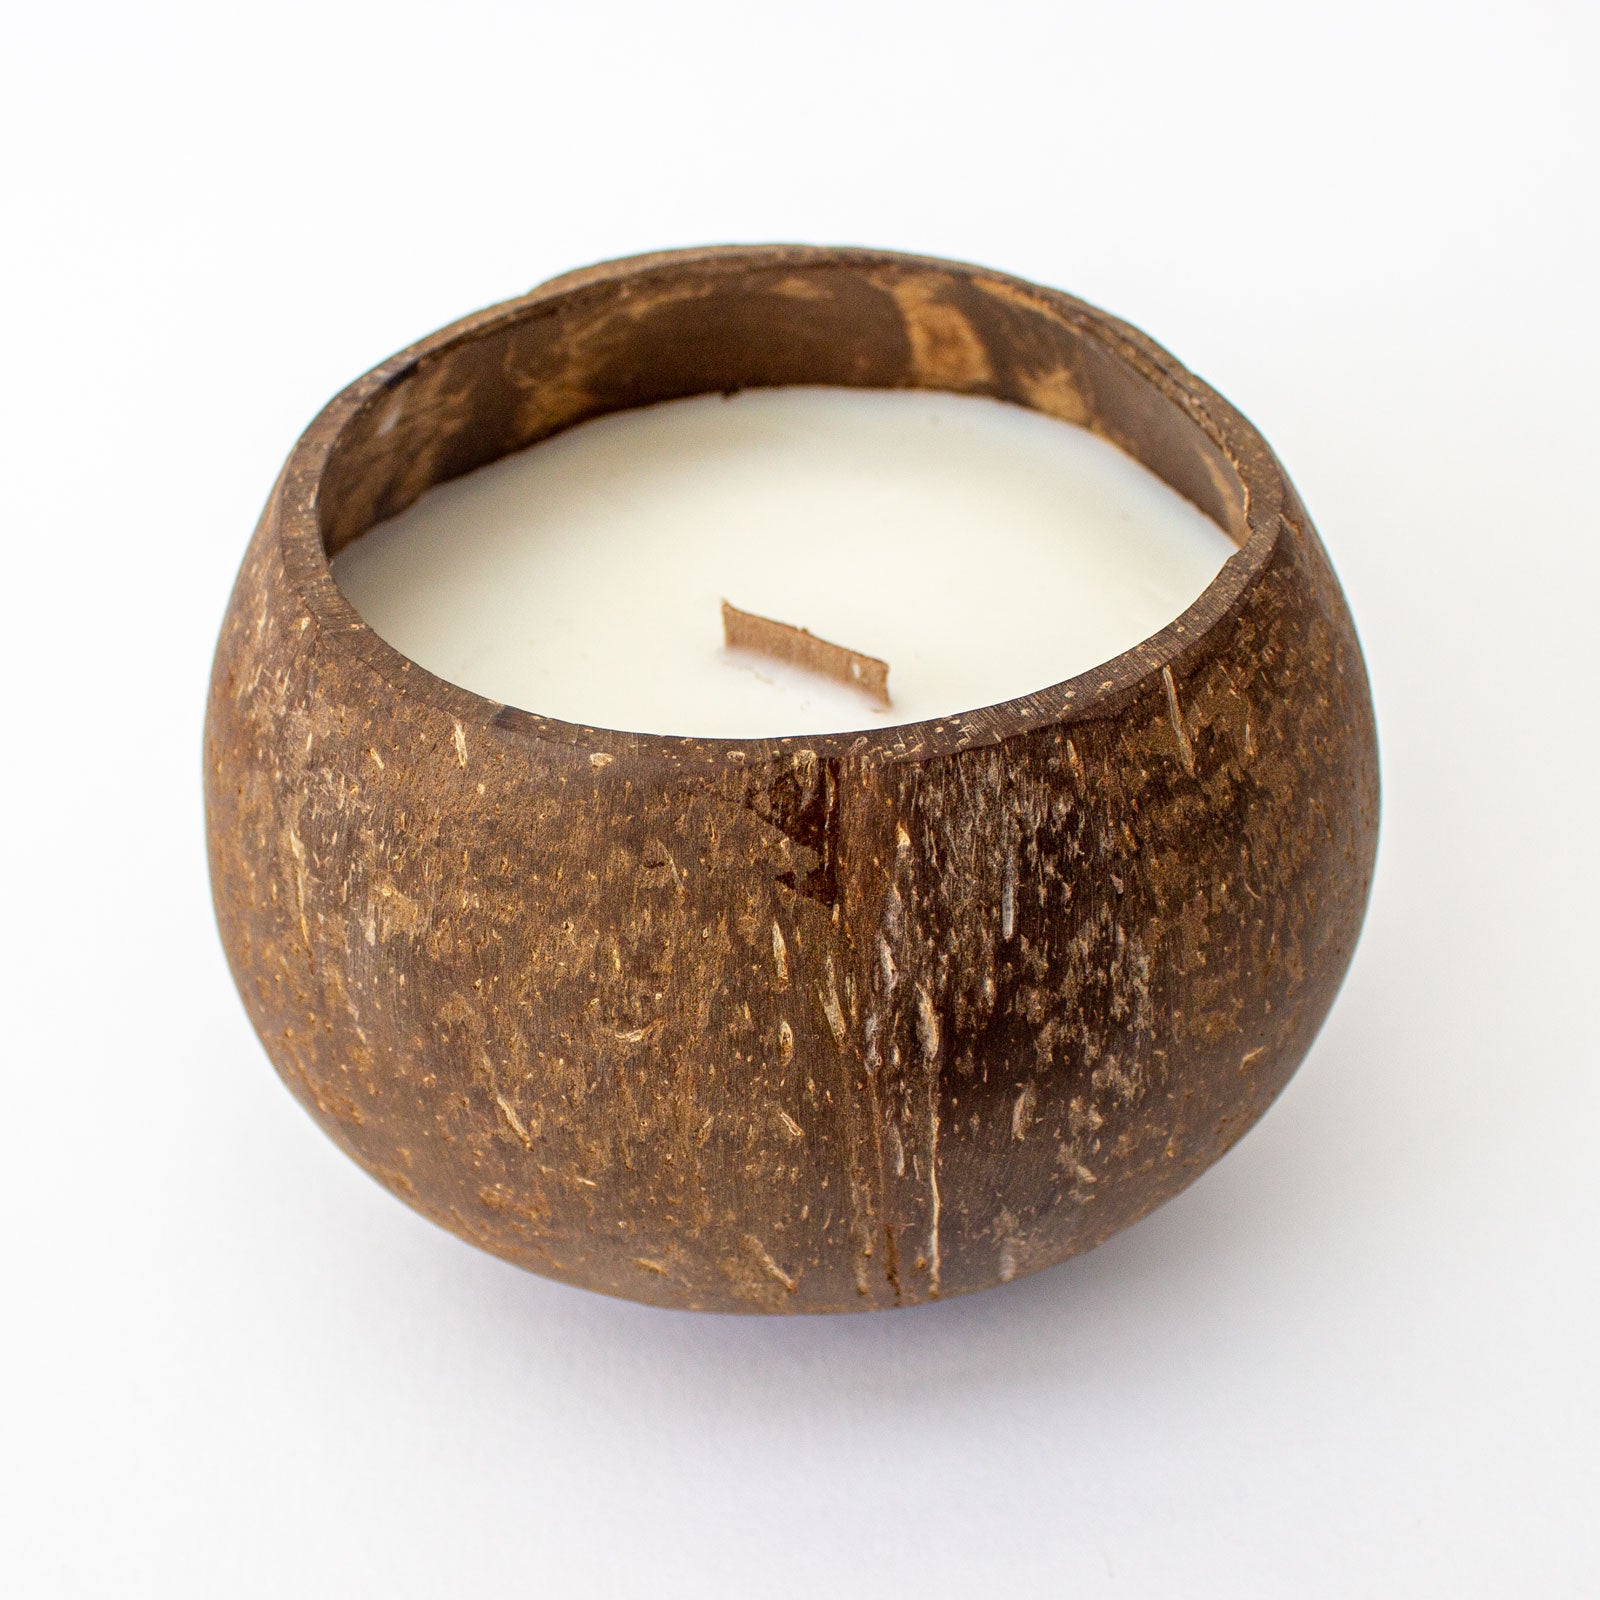 No.1 GRAN - Toasted Coconut Bowl Candle – Soy Wax - Gift Present